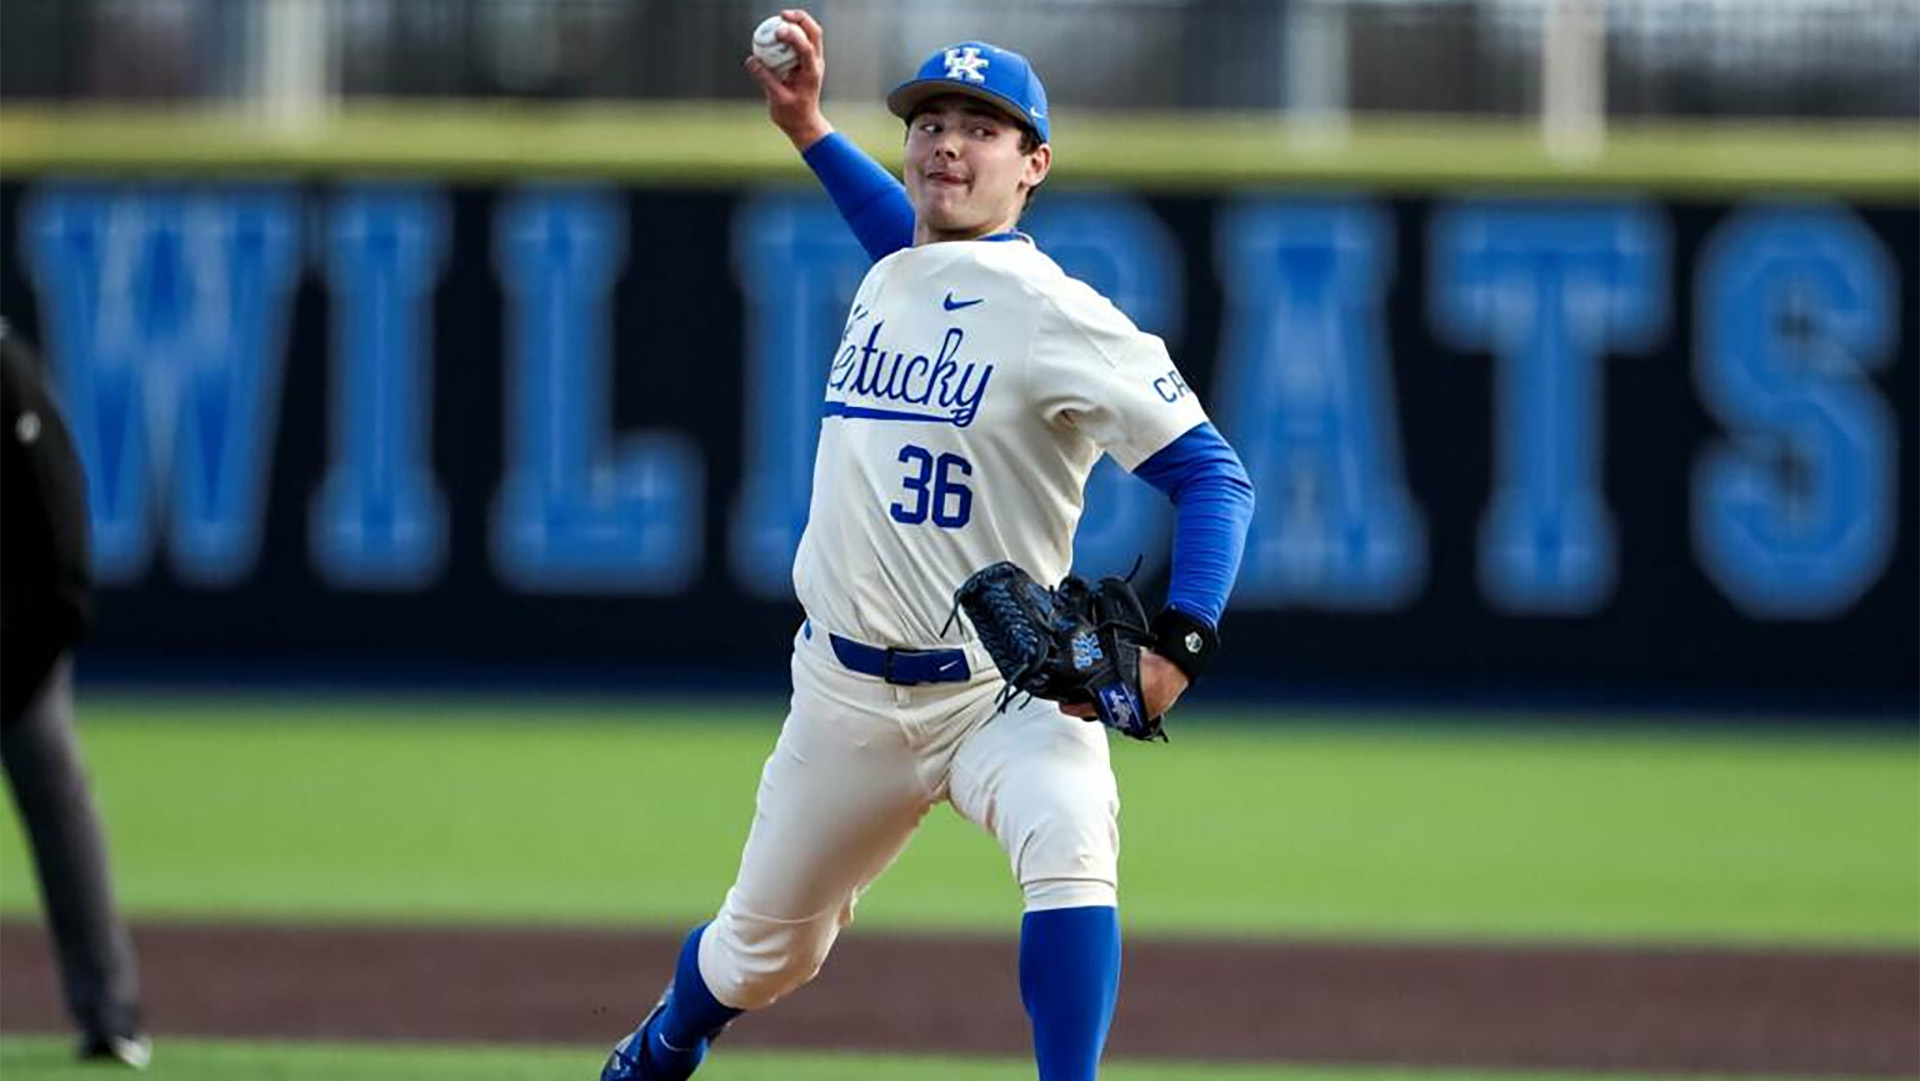 Double Vision: Kentucky Smacks Six Doubles in Friday Win